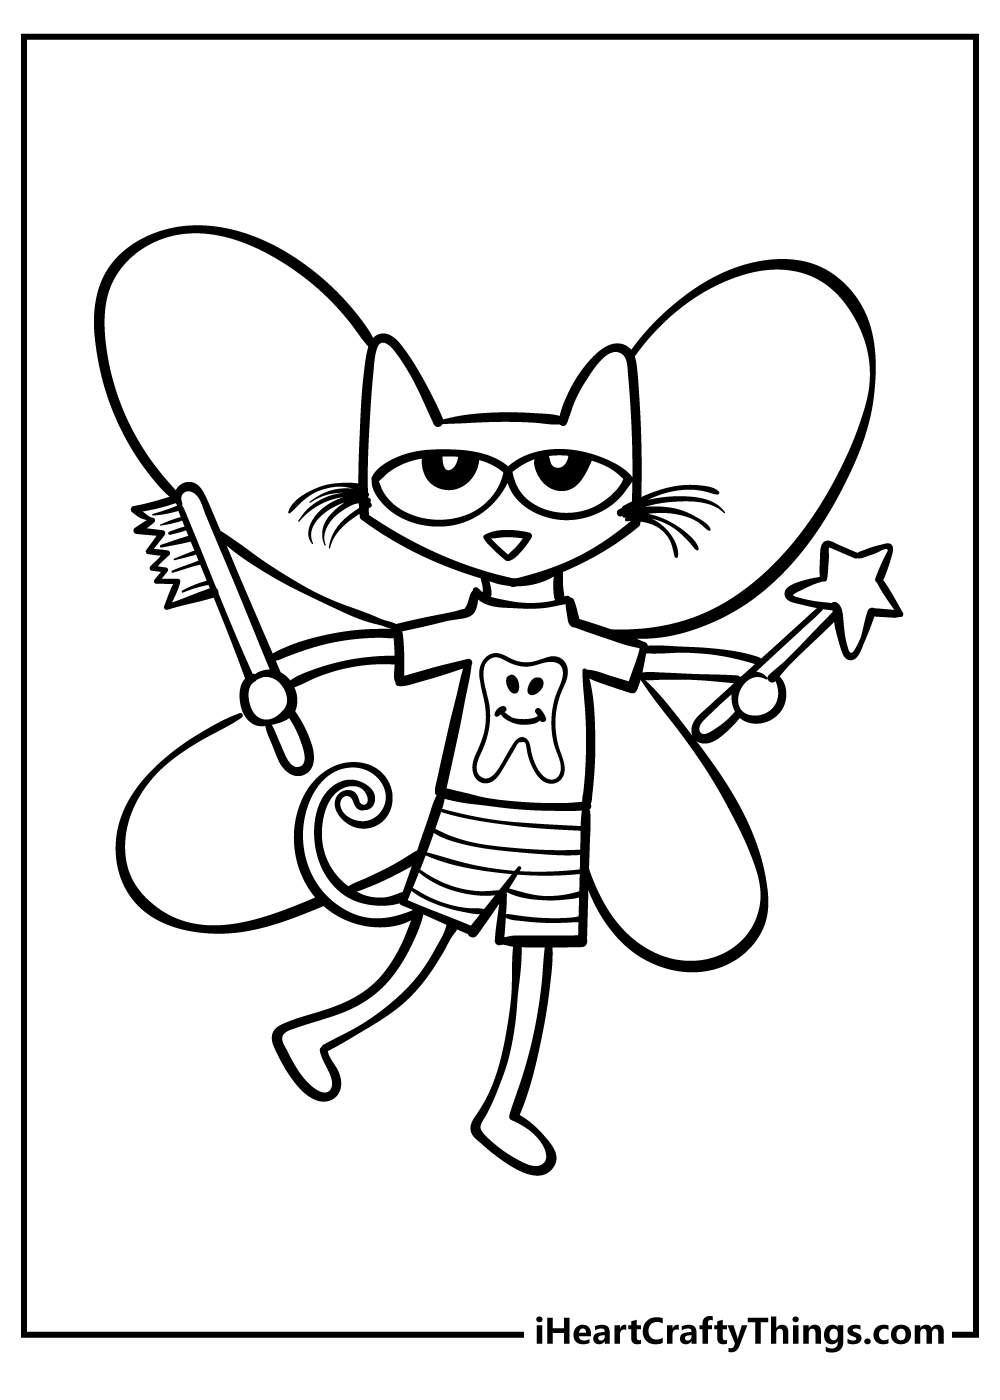 Pete The Cat Coloring Pages free pdf download